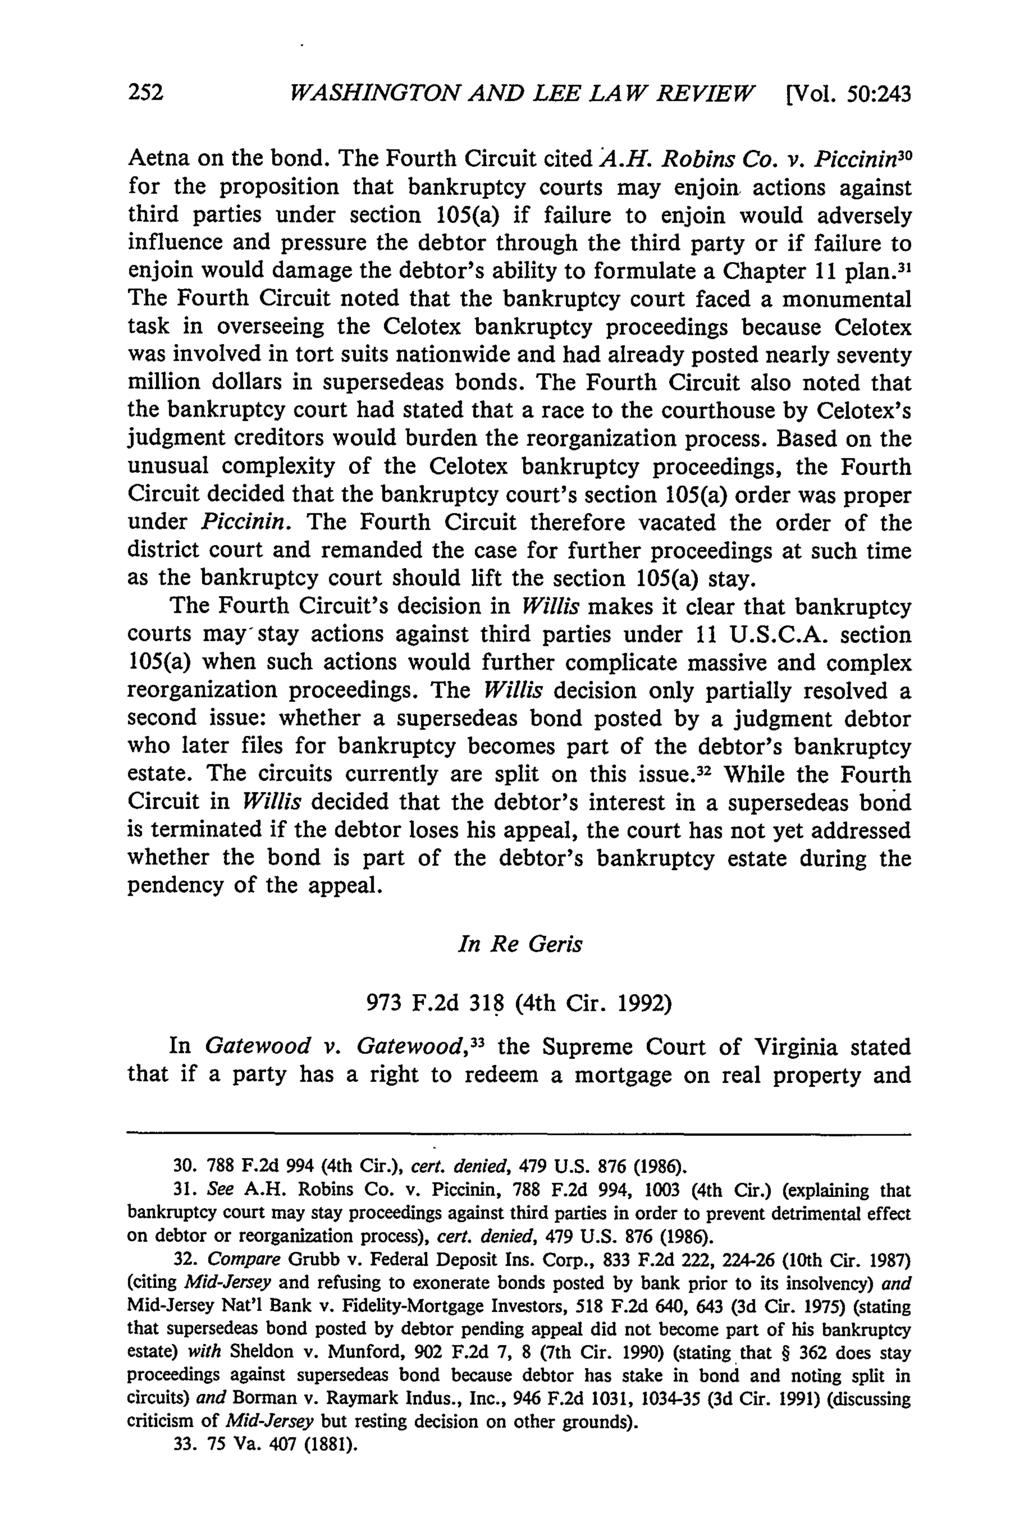 WASHINGTON AND LEE LAW REVIEW [Vol. 50:243 Aetna on the bond. The Fourth Circuit cited A.H. Robins Co. v.